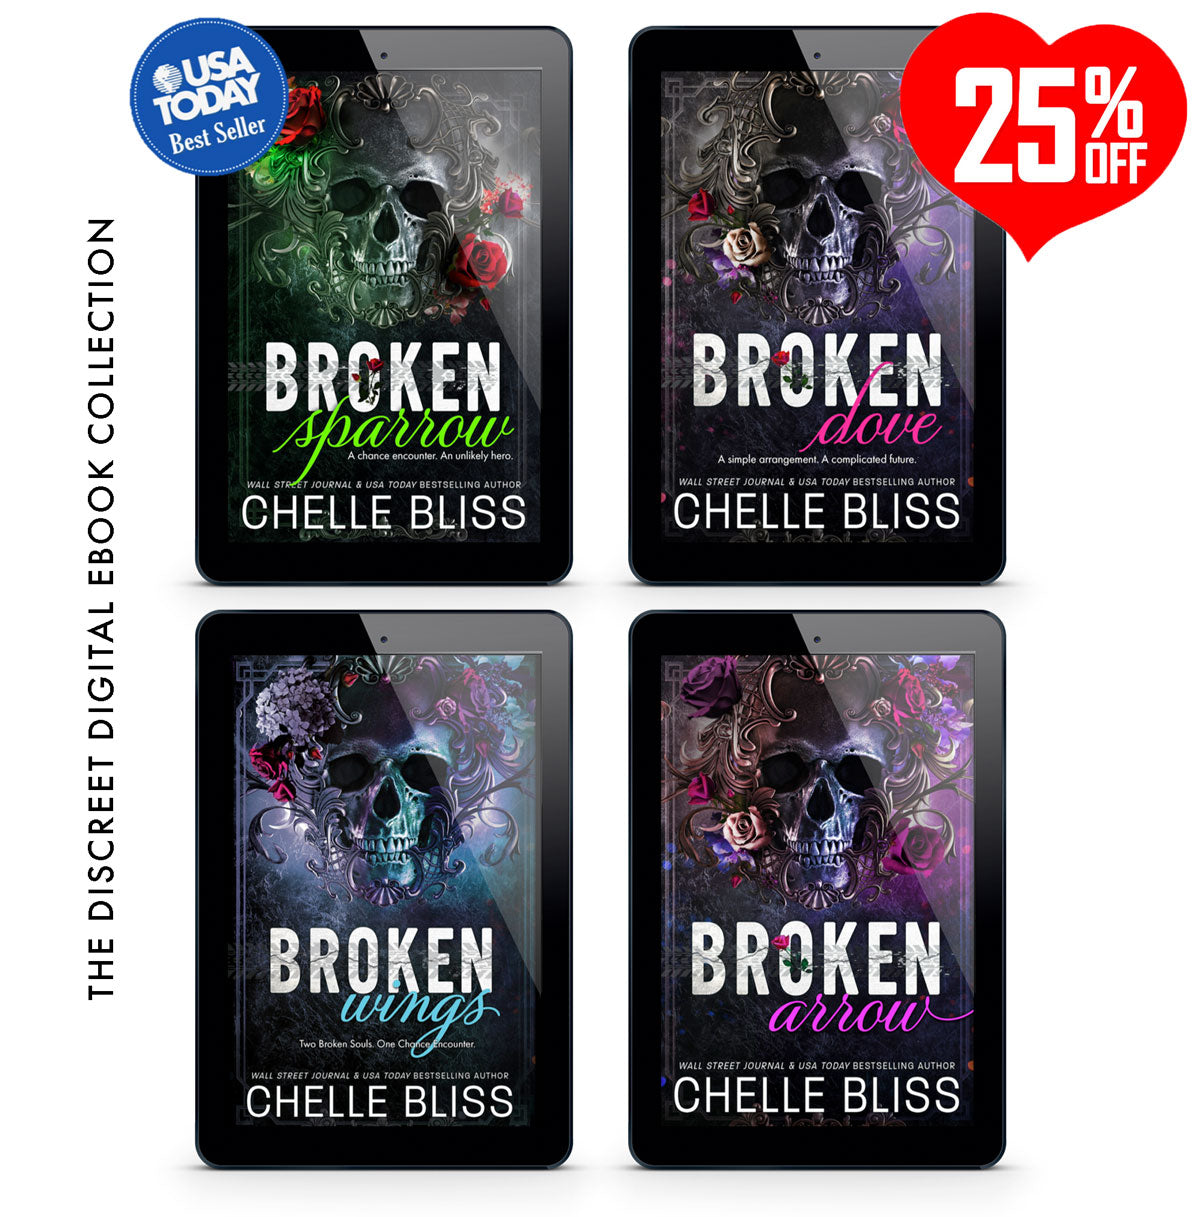 skulls usa today best selling open road ebook bundle by chelle bliss with twenty five percent discount 